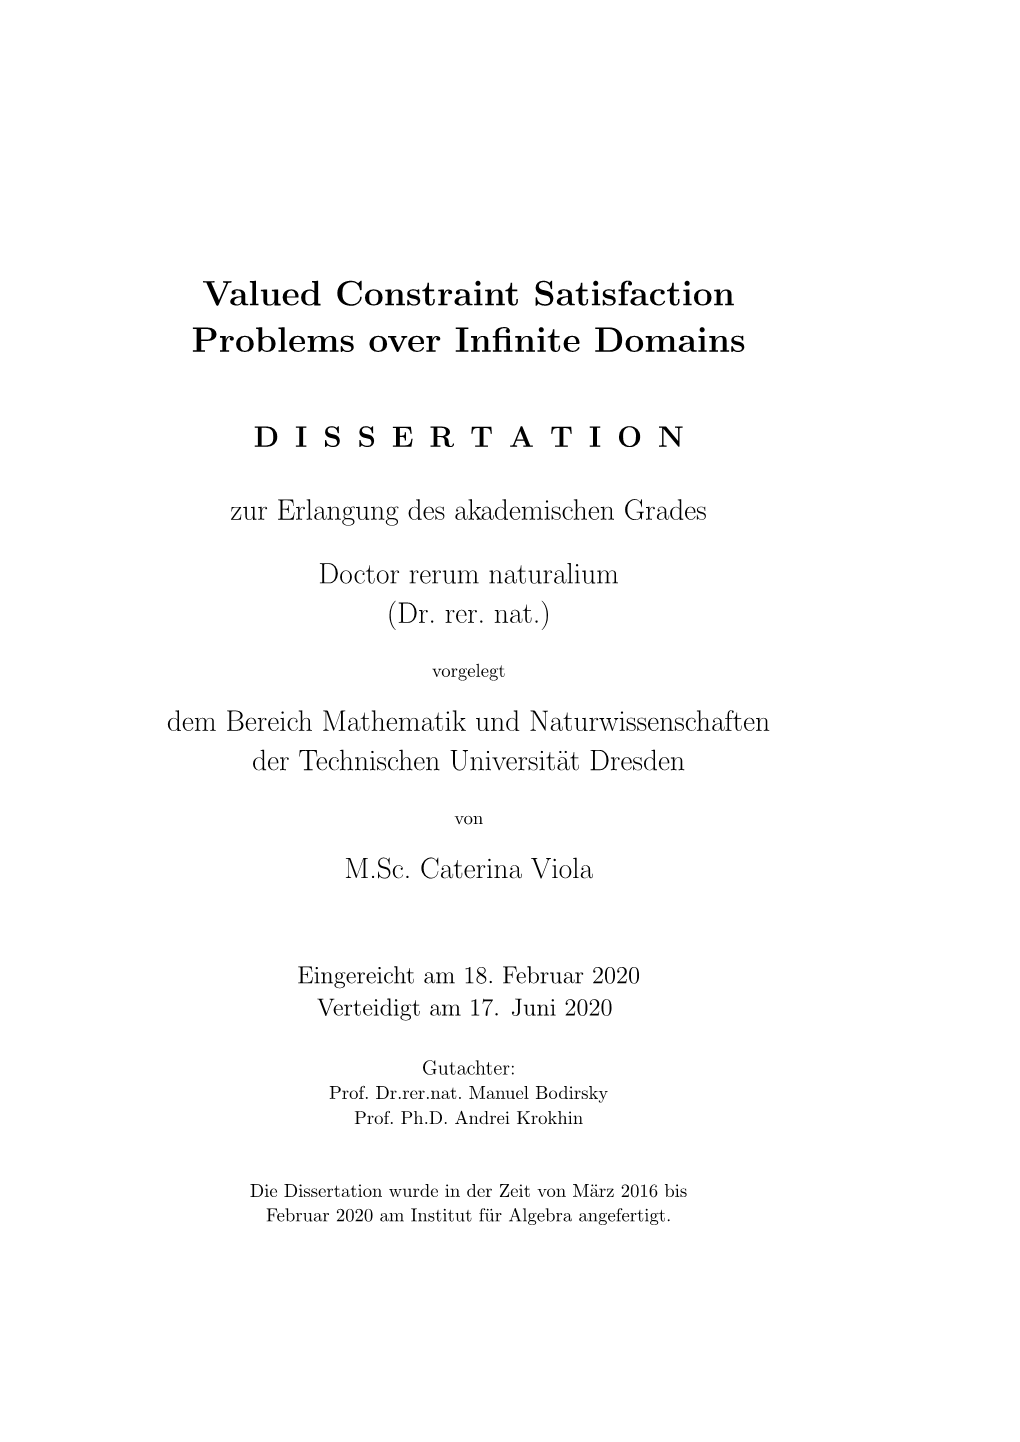 Valued Constraint Satisfaction Problems Over Infinite Domains